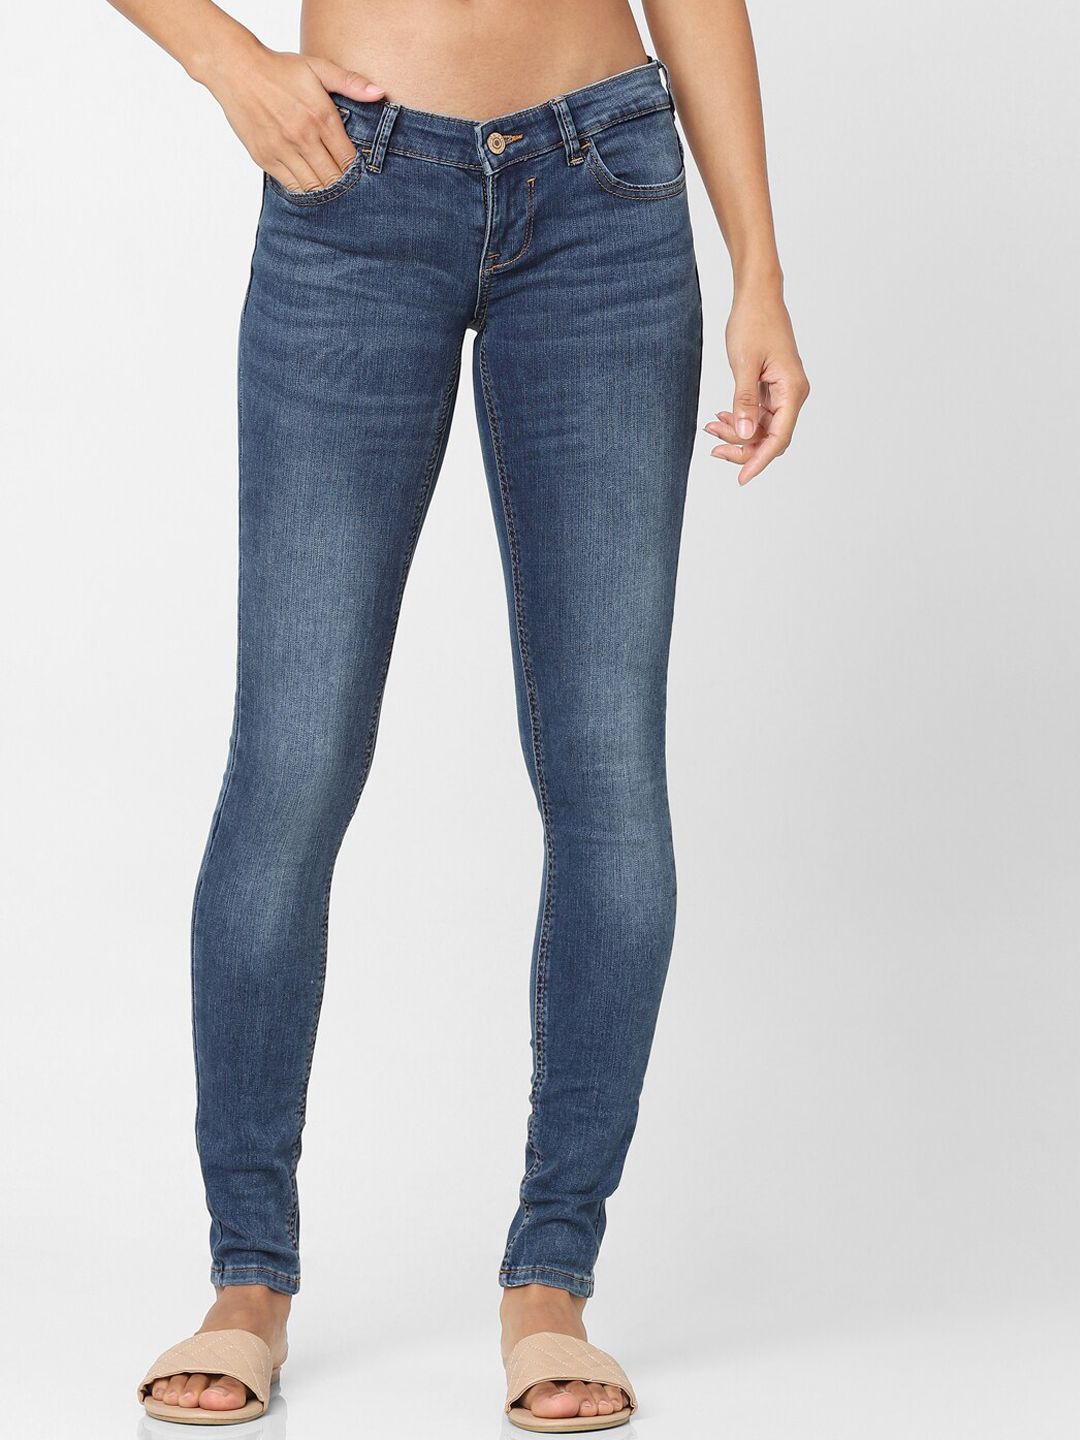 ONLY Women Blue Skinny Fit Low-Rise Light Fade Jeans Price in India